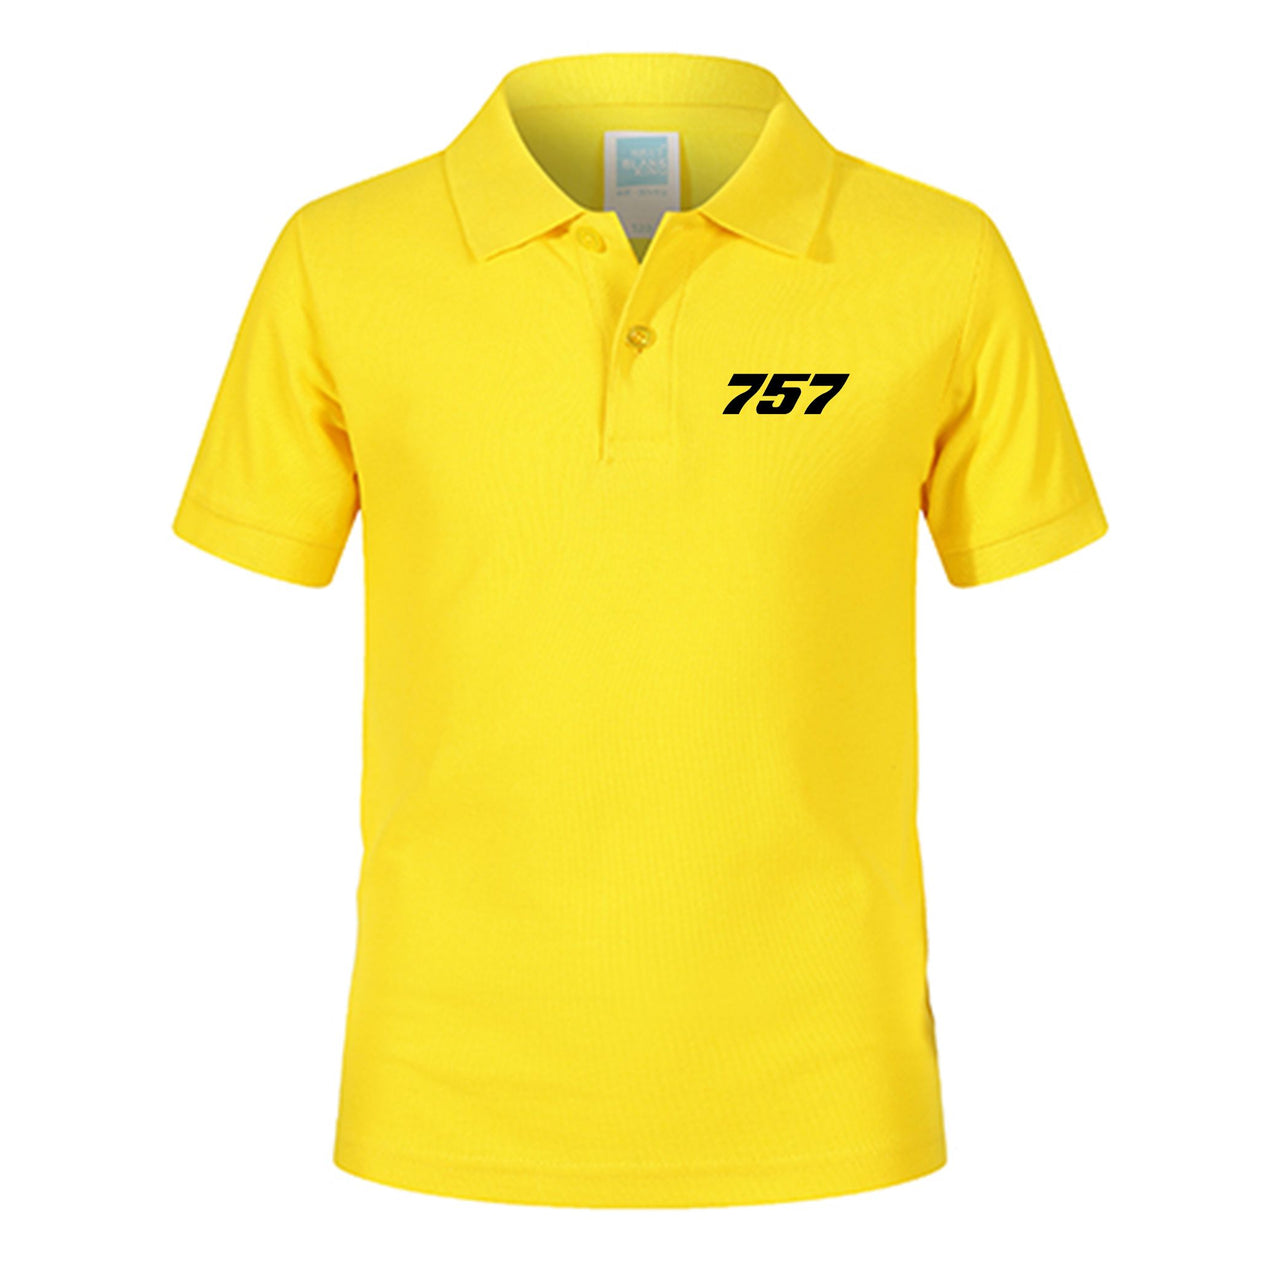 757 Flat Text Designed Children Polo T-Shirts